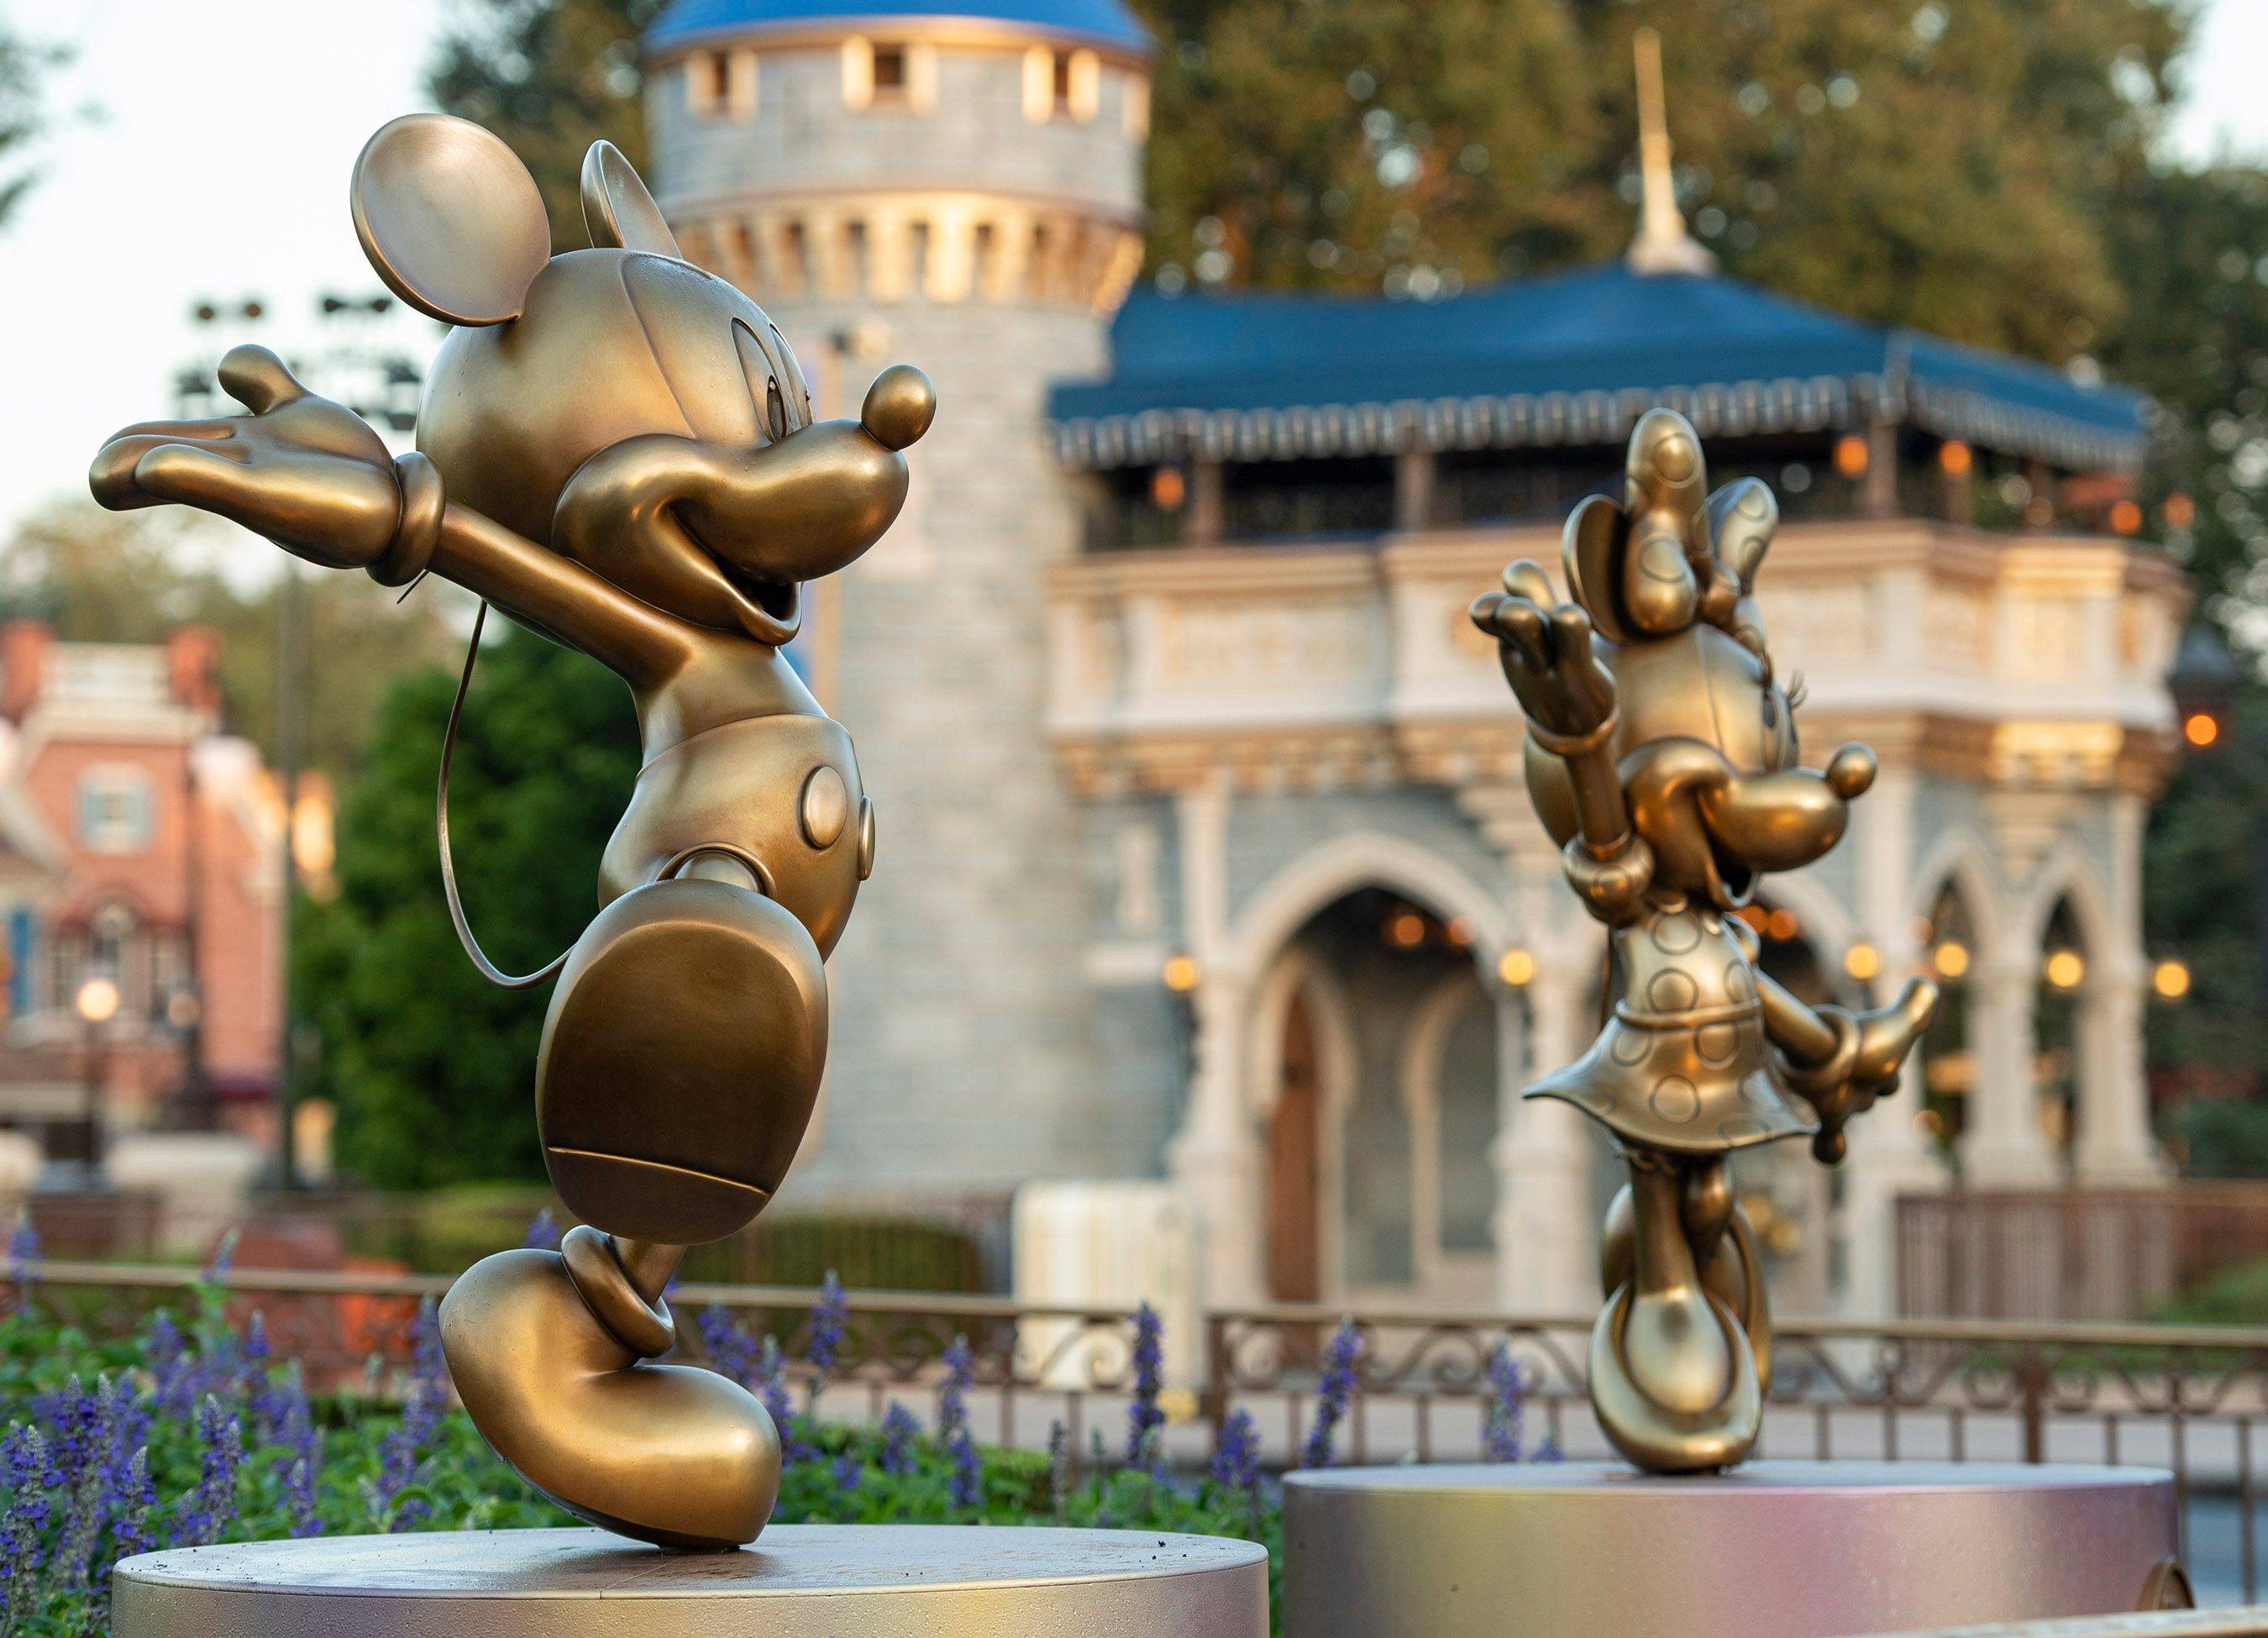 First of the 'Disney Fab 50' golden character sculptures now on display at Magic Kingdom